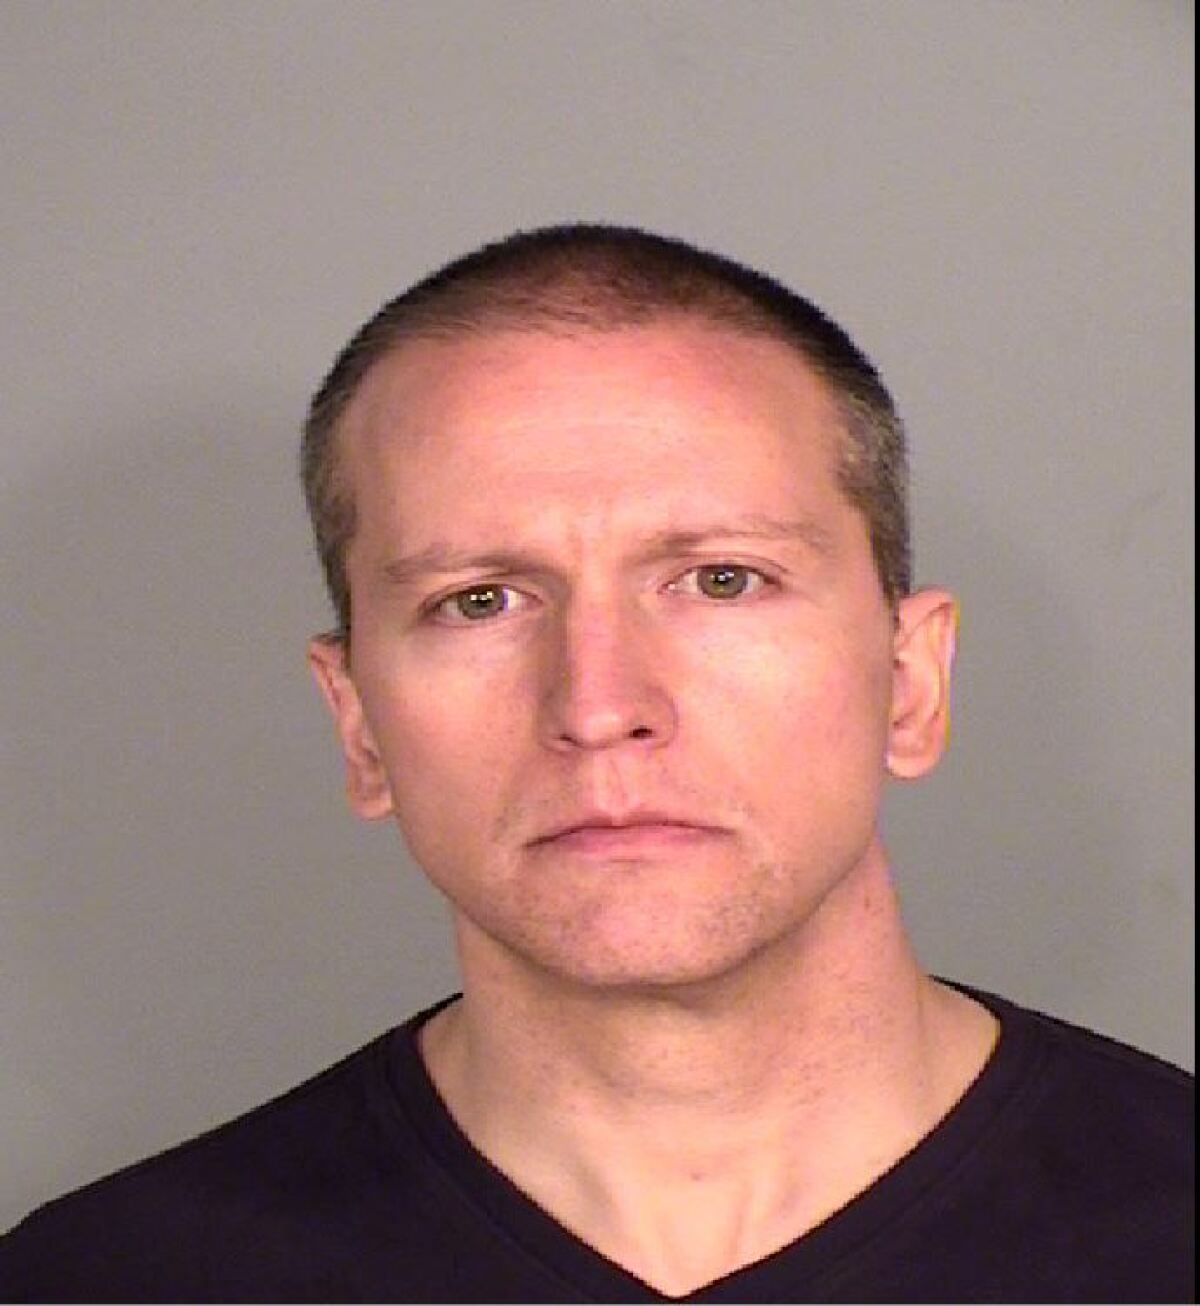 The booking photo of Minneapolis Police Officer Derek Chauvin